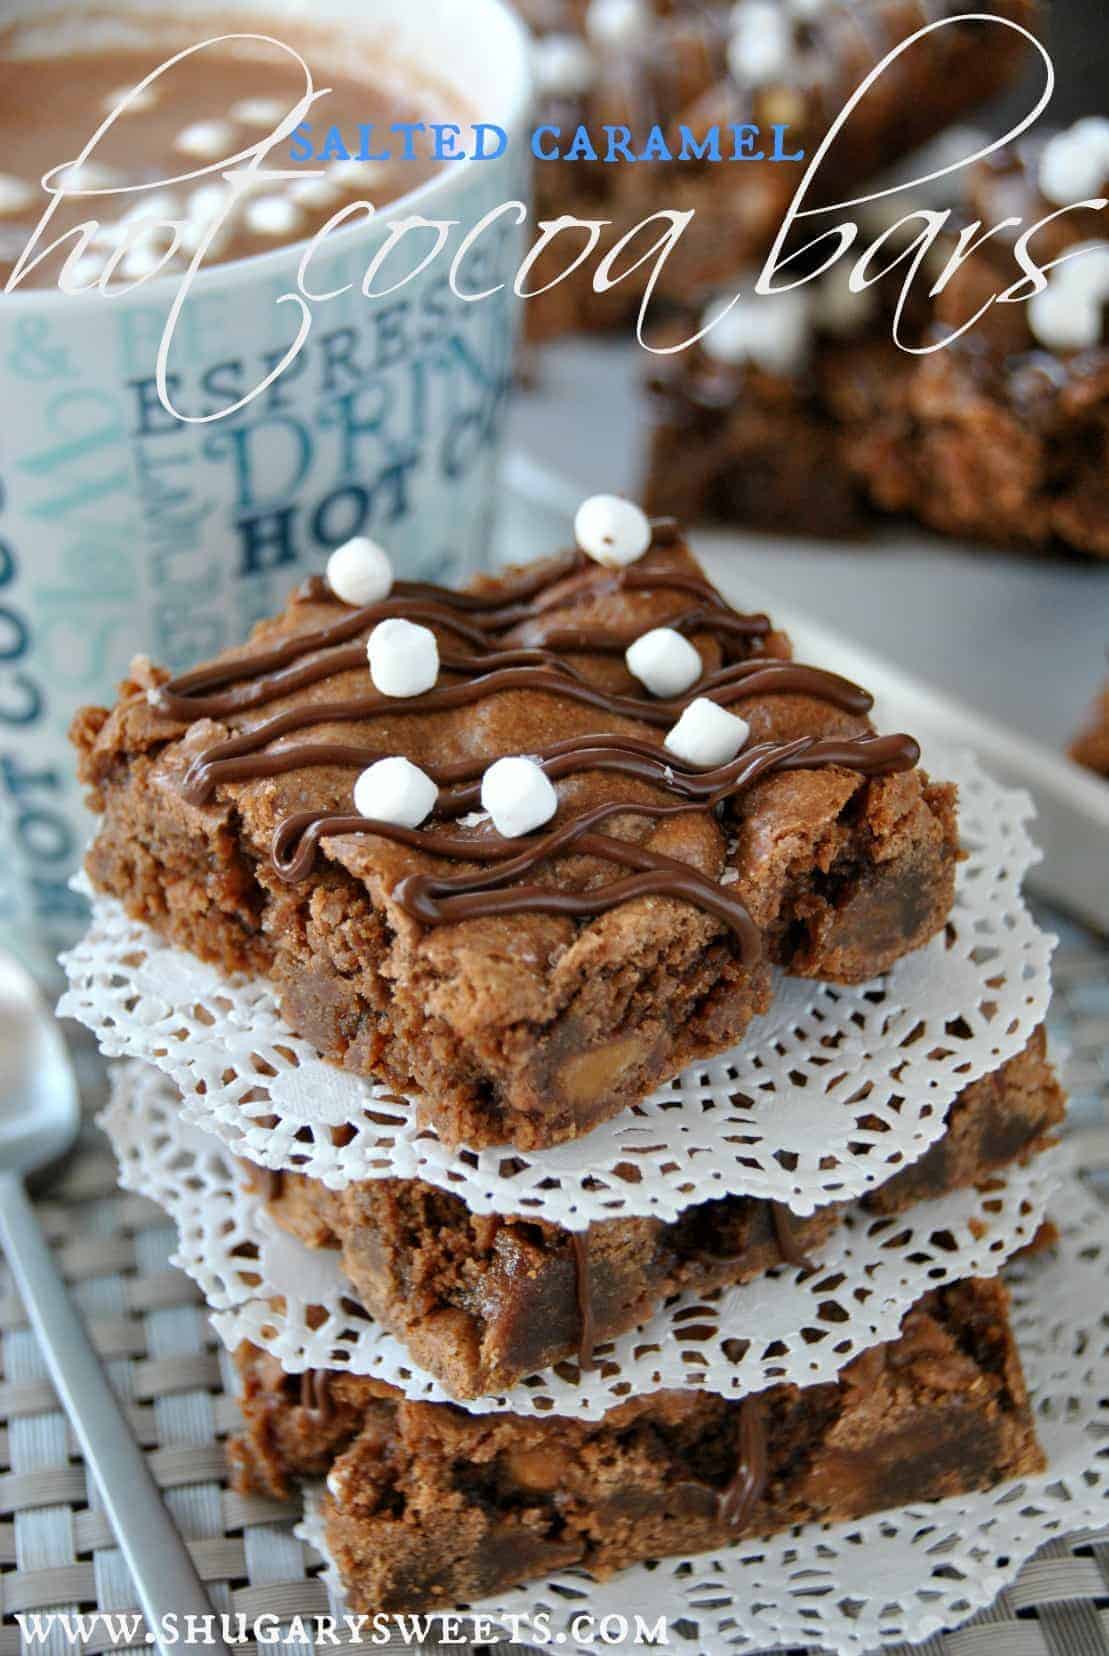 Salted Caramel Hot Cocoa Bars- rich and chewy fudge brownies filled with caramel, chocolate and marshmallows. #saltedcaramel #hotchocolate www.shugarysweets.com